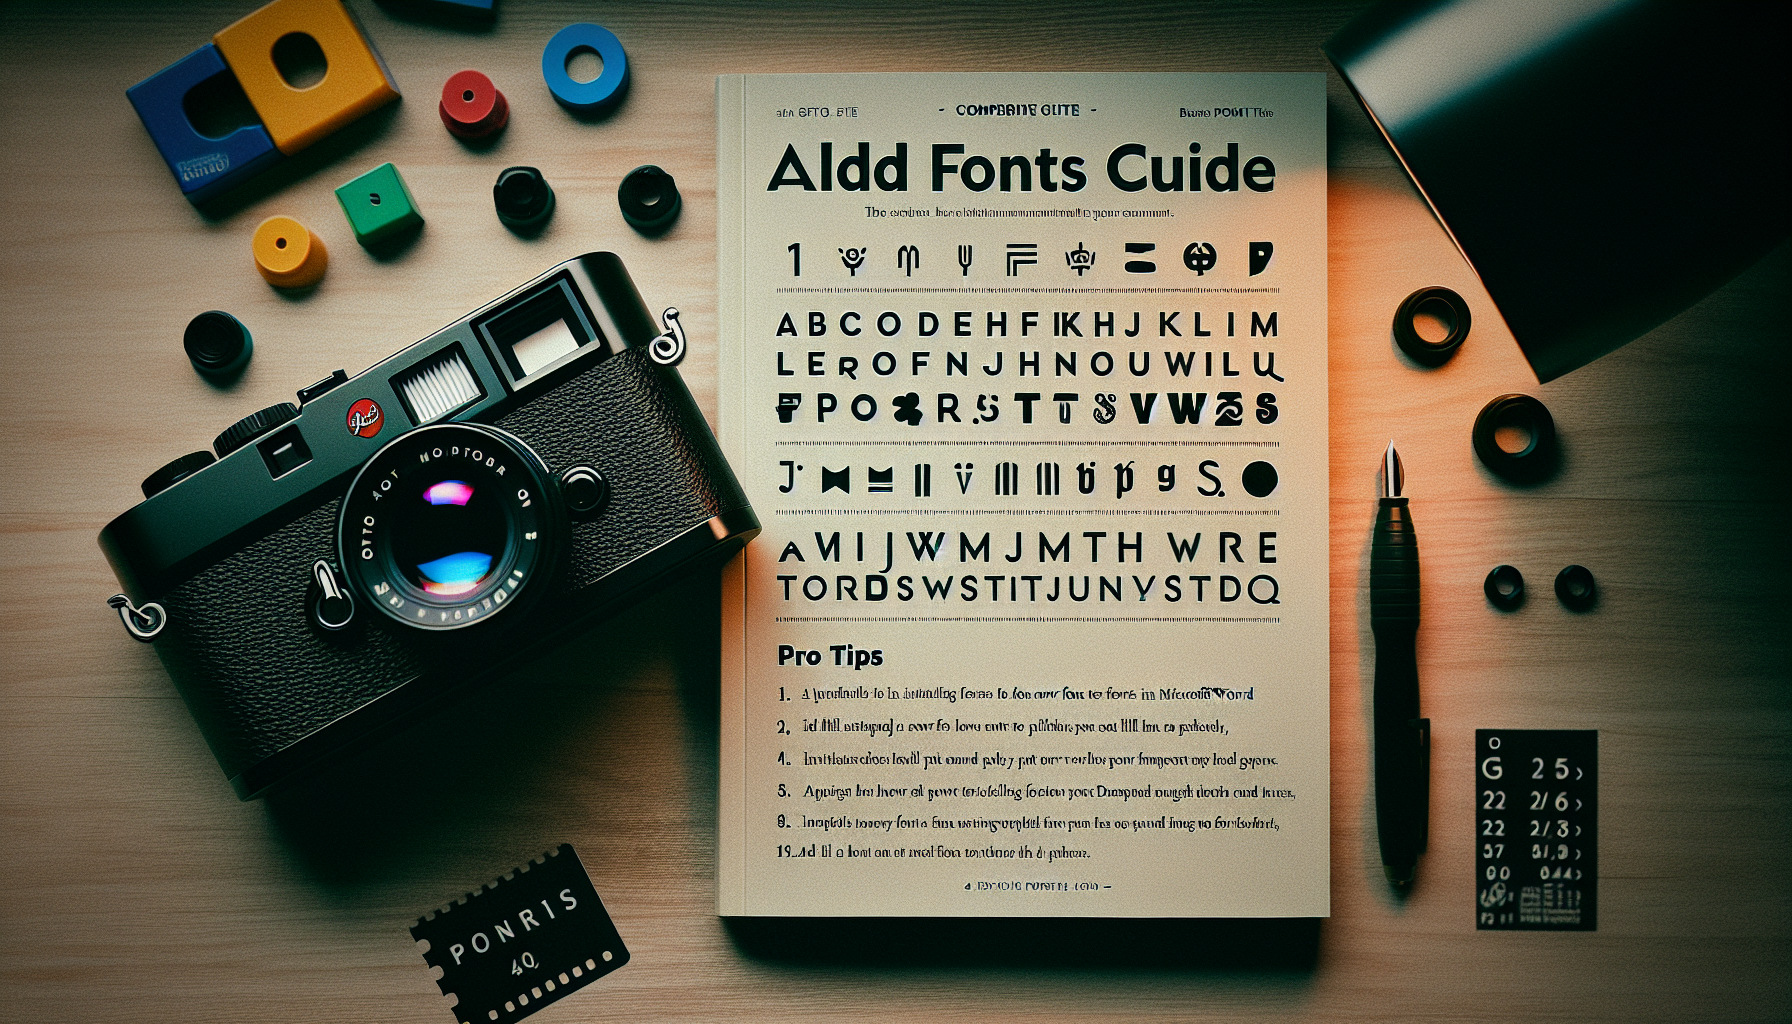 How to Add Fonts in Microsoft Word - Vegadocs